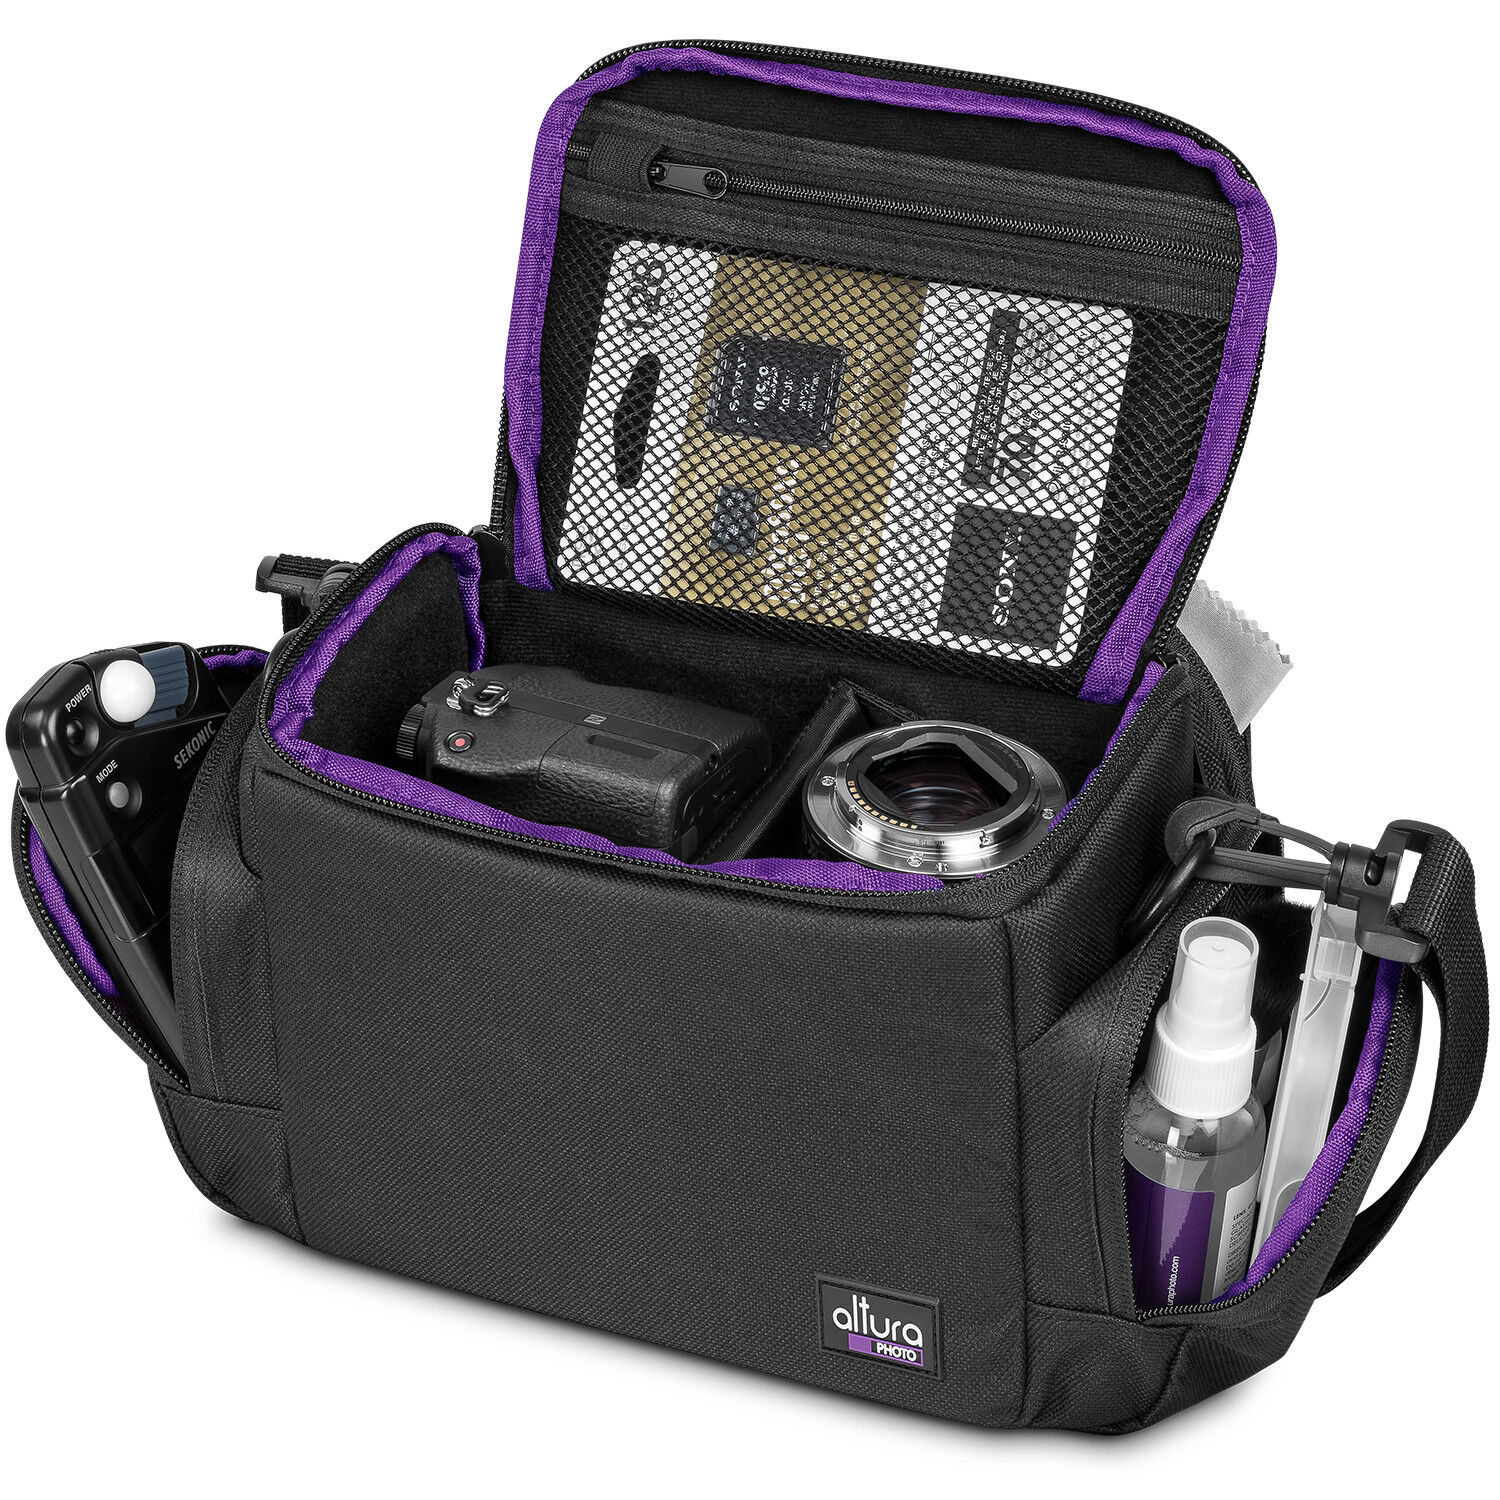 Medium Camera Bag Case by Altura Photo for Nikon Canon Sony DSLR and Mirrorless